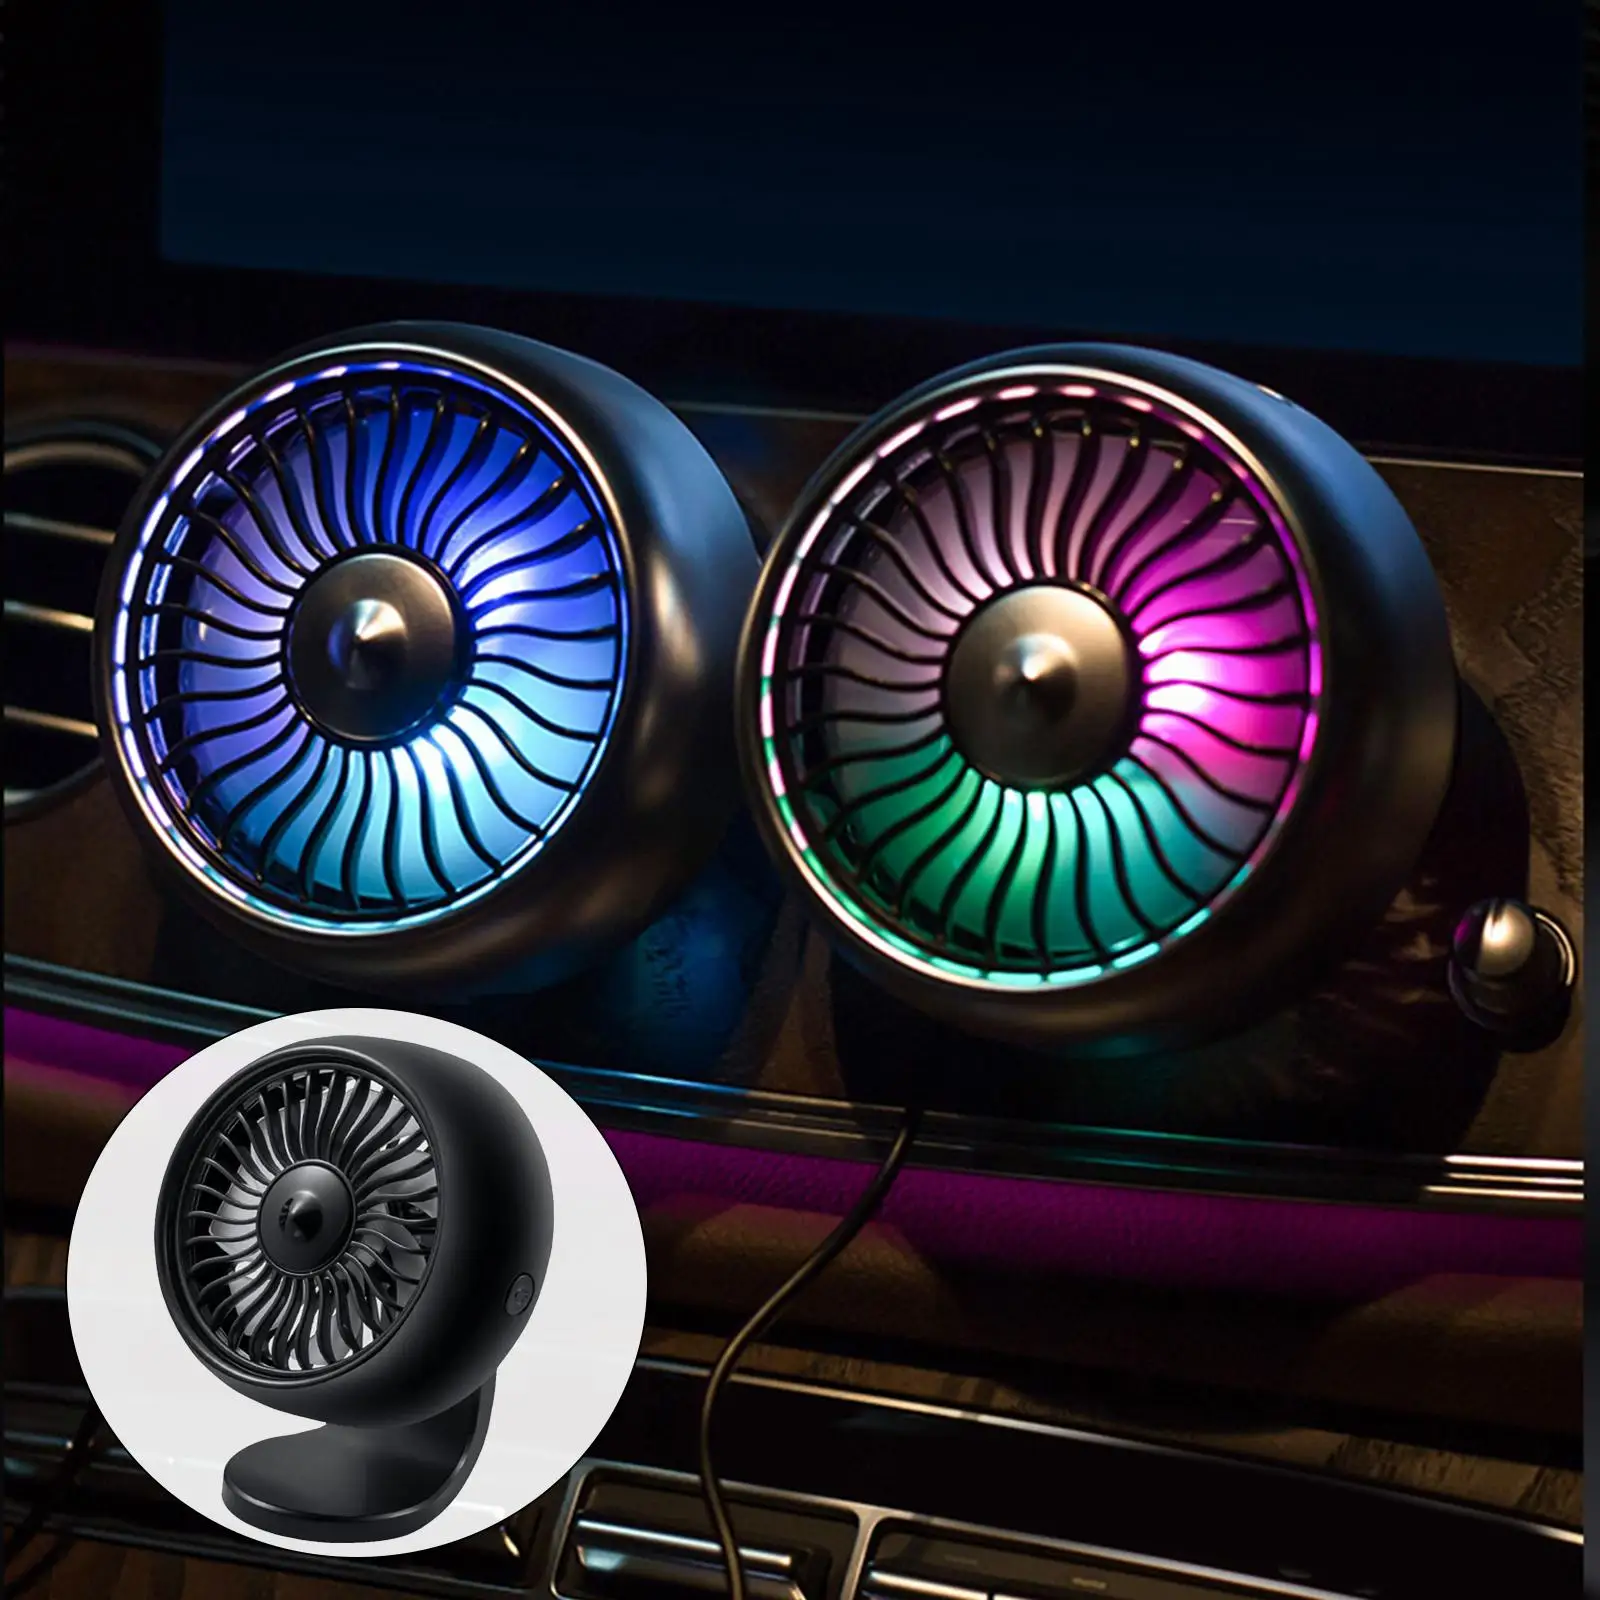 Car Fan Air Vent Mount 3 Speed Universal with Colorful Light Cooling Fan Fits for Auto